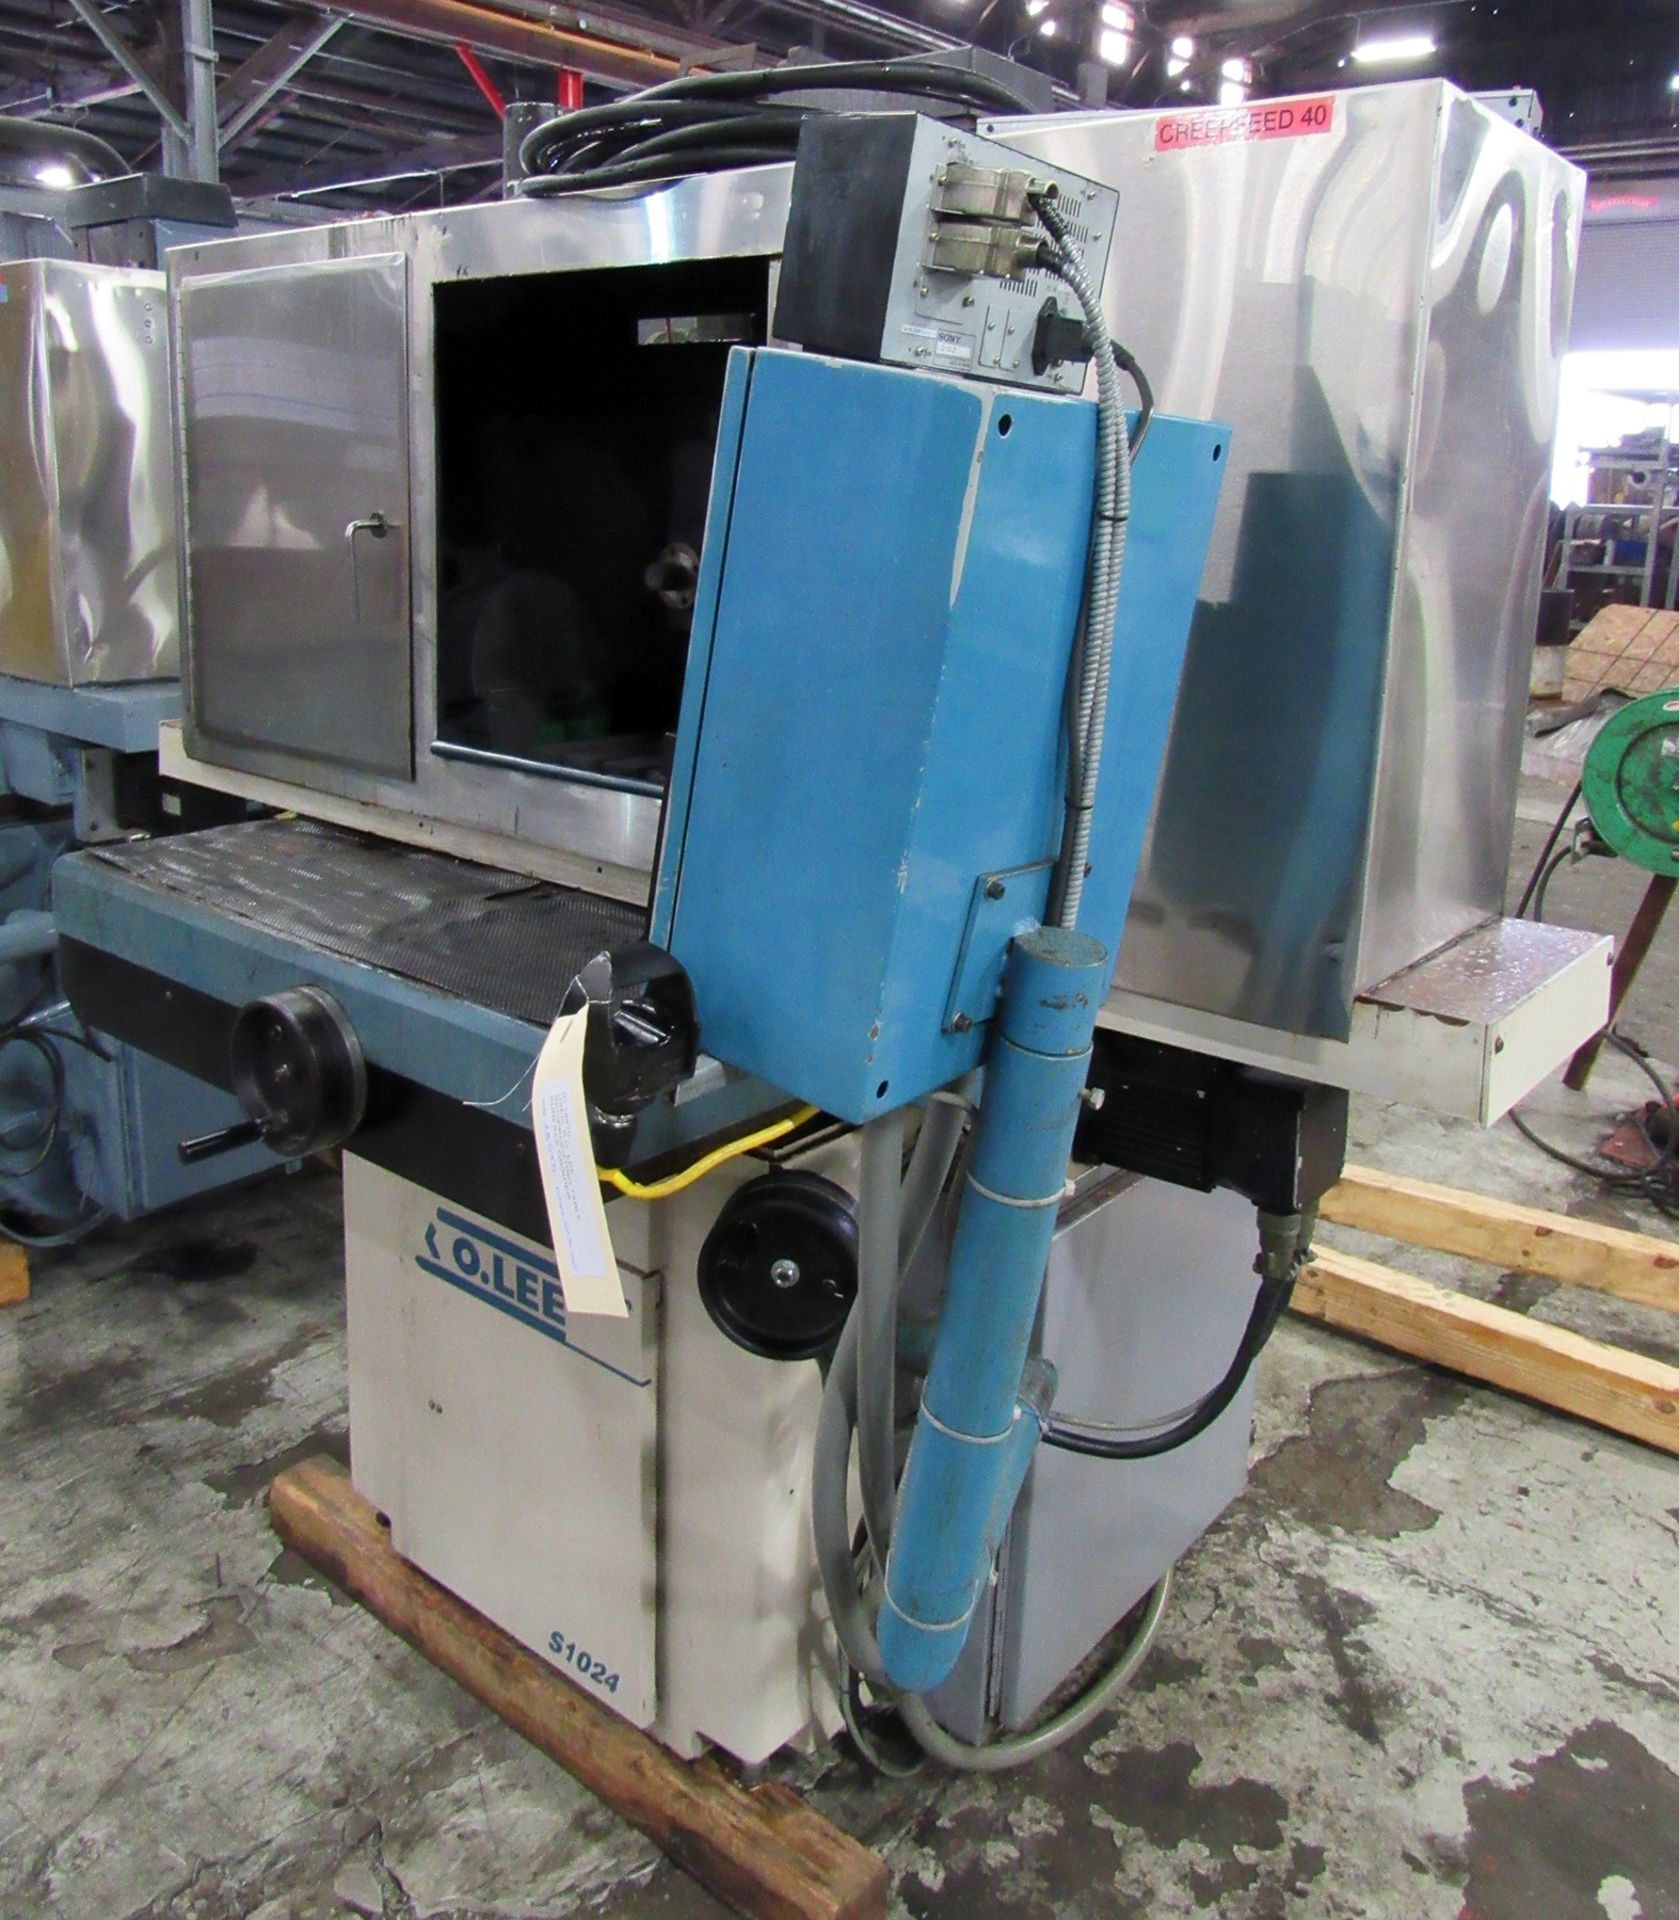 K.O. LEE MODEL S1024-550 CREEP FEED TYPE RECIPROCATING TABLE SURFACE GRINDER - Image 3 of 11